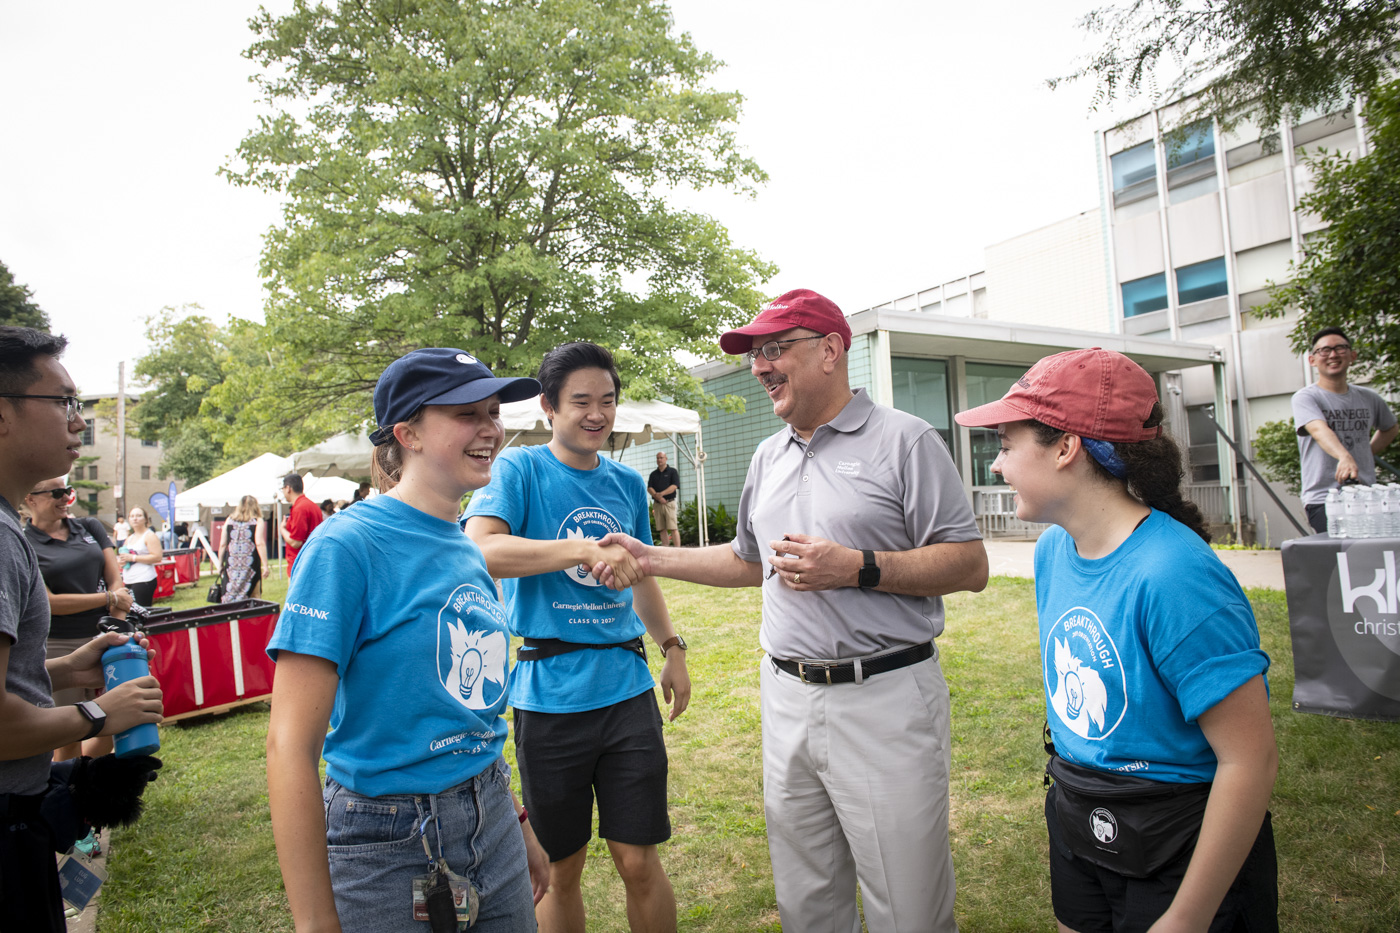 A photo of students shaking hands with Farnam Jahanian.